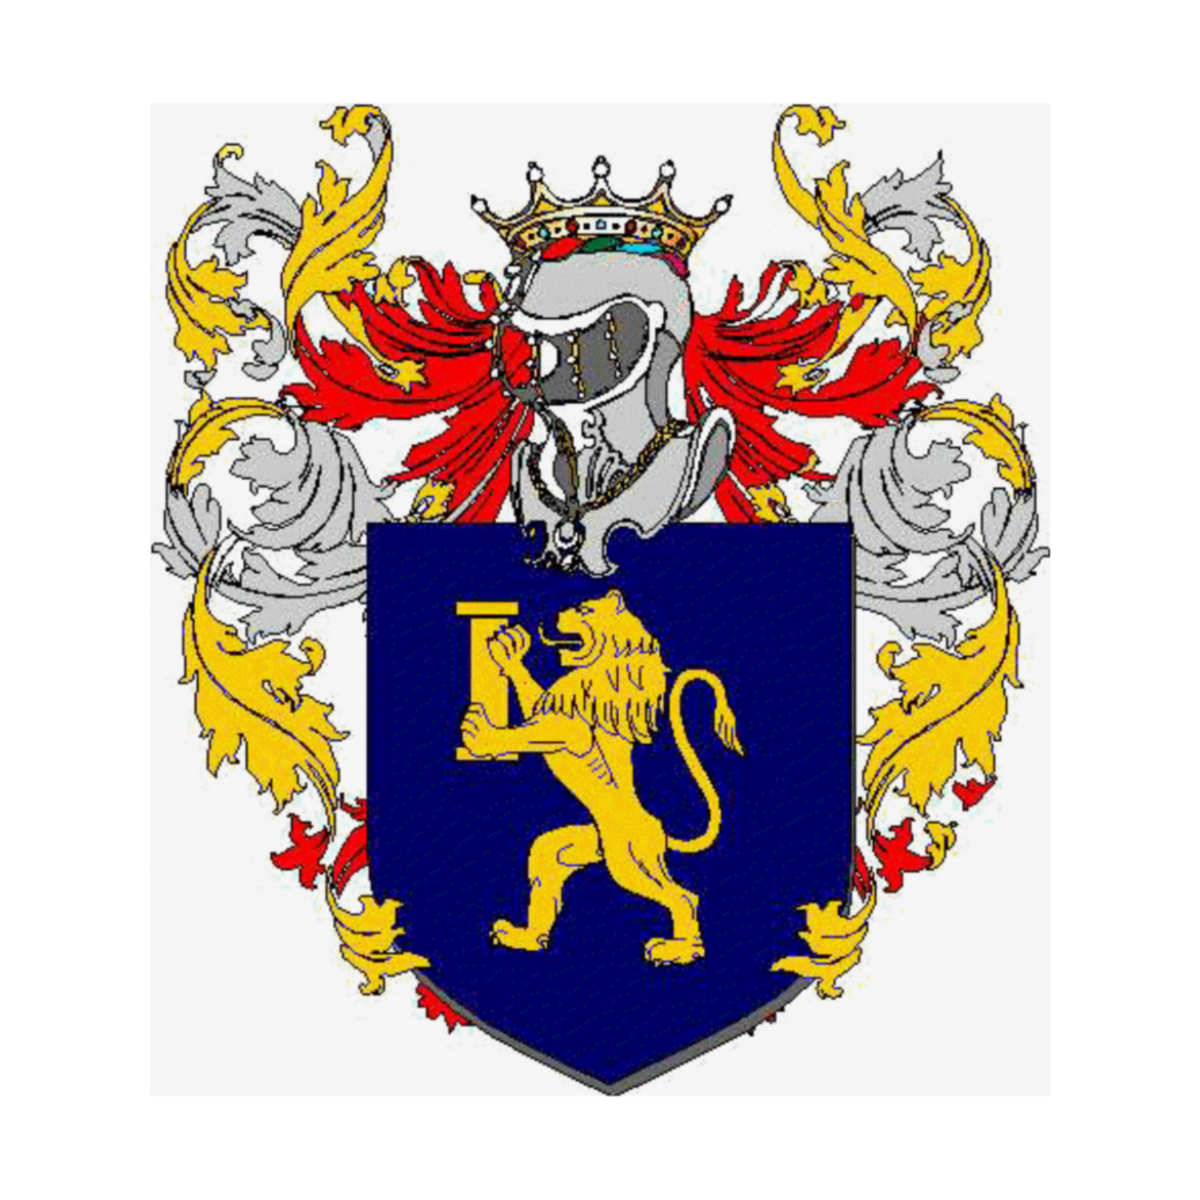 Wappen der Familie Doniano